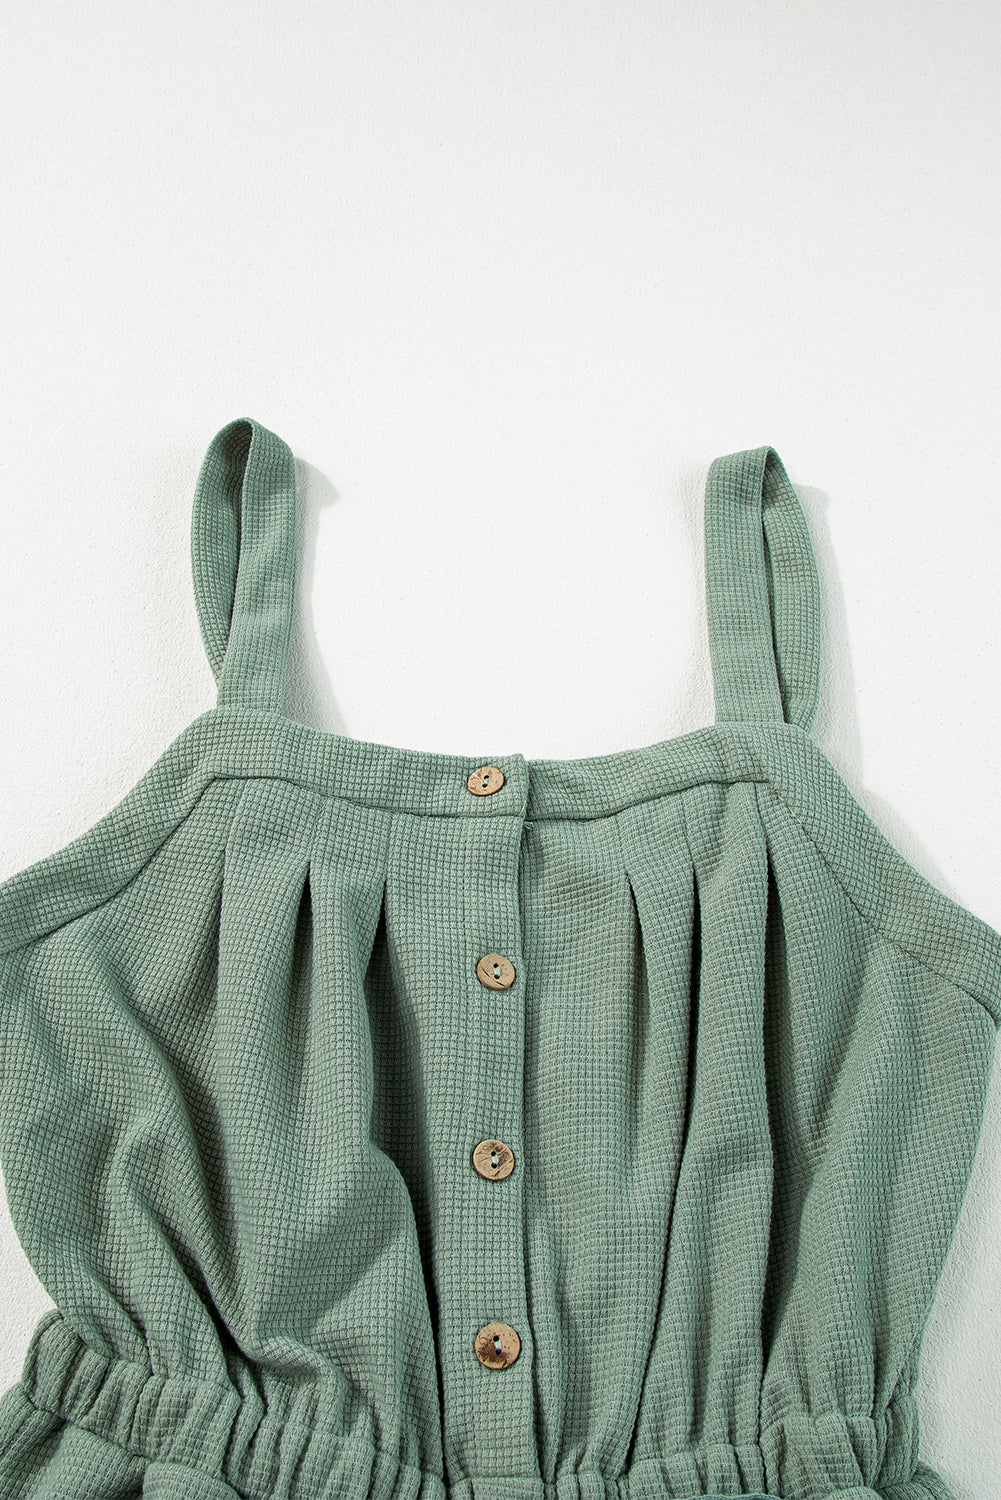 Moss Green Knotted Straps Button Textured Drawstring Jumpsuit